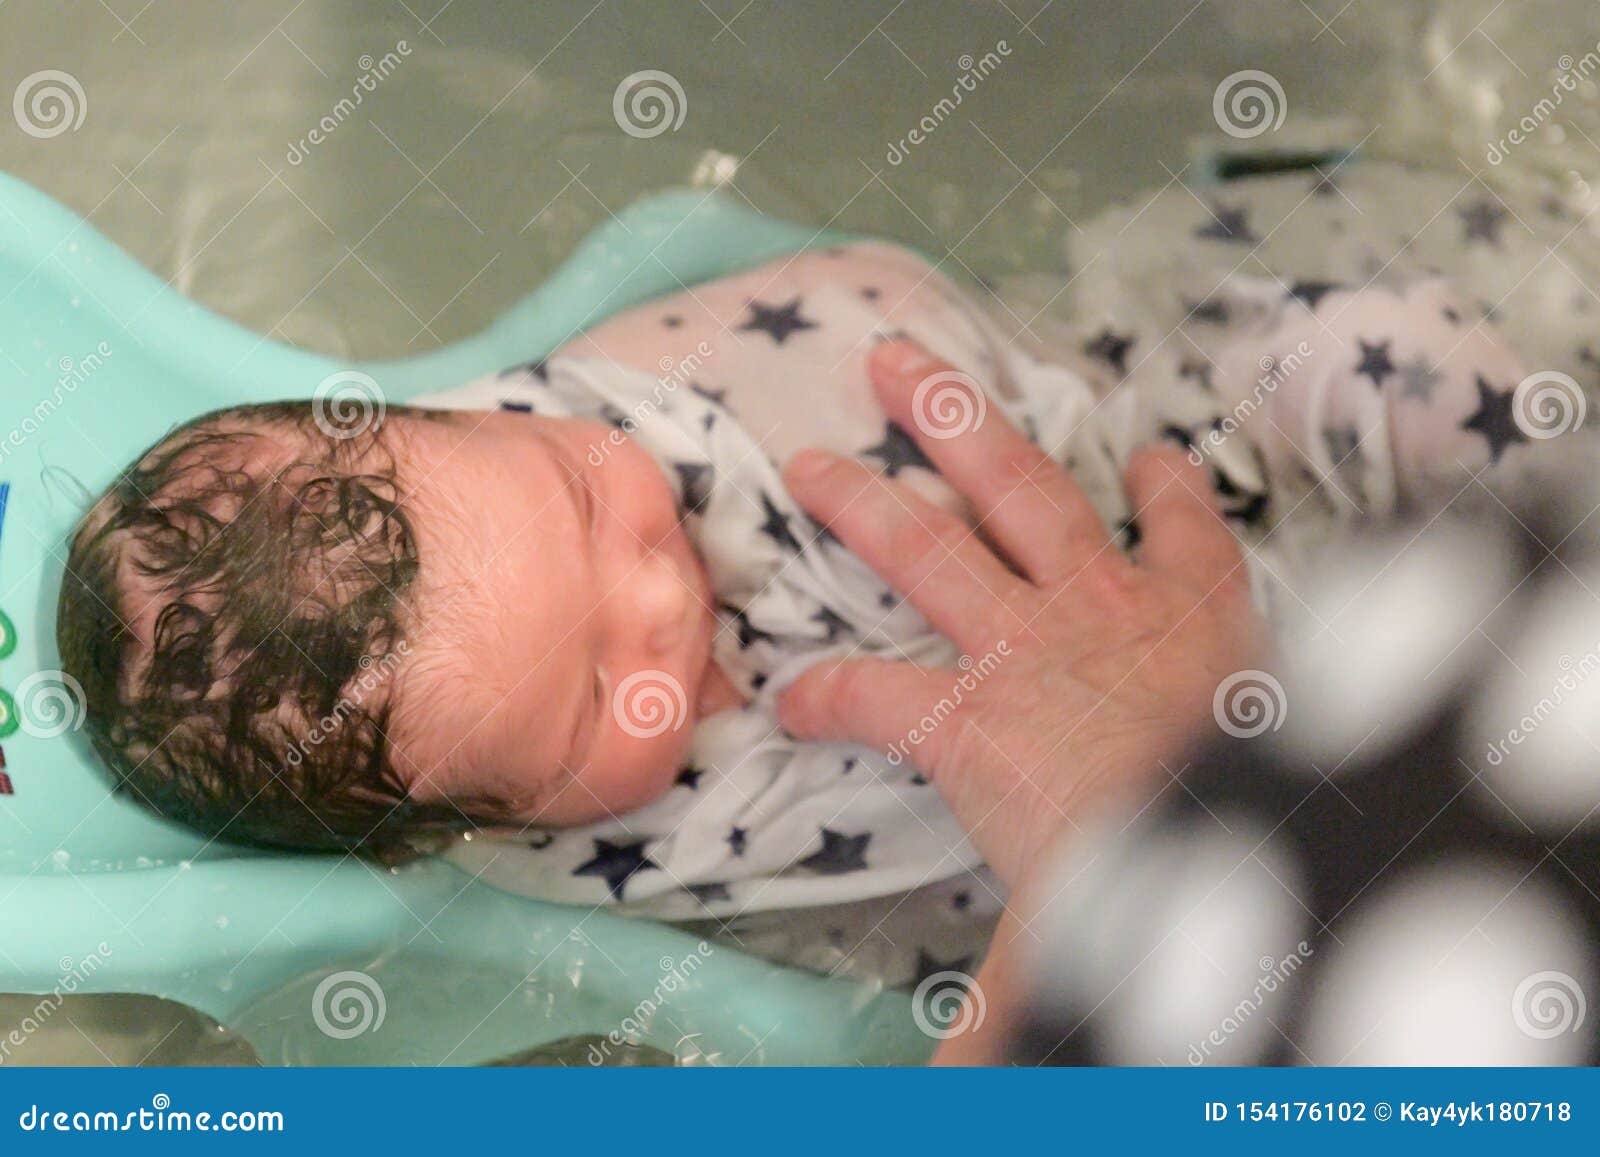 Bathing A Newborn At Home A Picture Of A Newborn Baby From The First Bathroom Stock Photo Image Of Human Mother 154176102